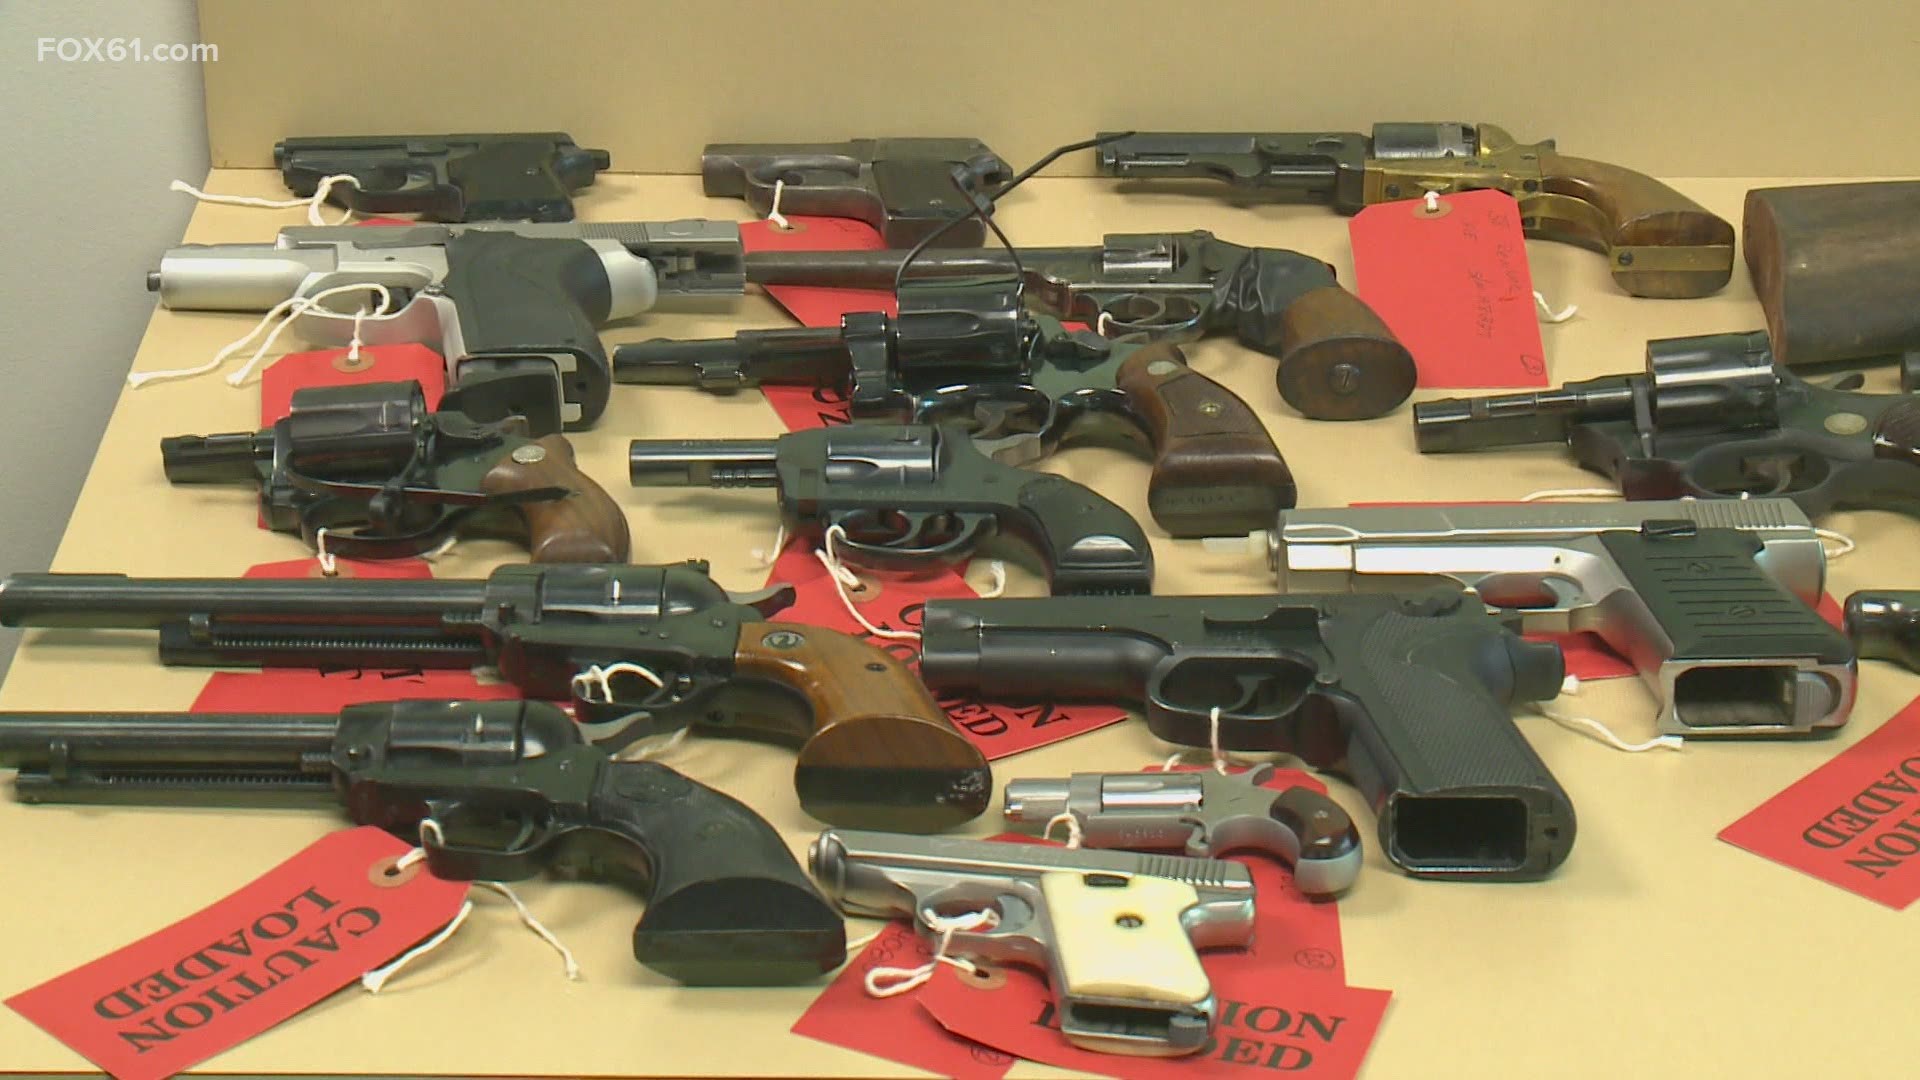 The Hartford Police Department collected 59 guns at a buy back event Saturday.